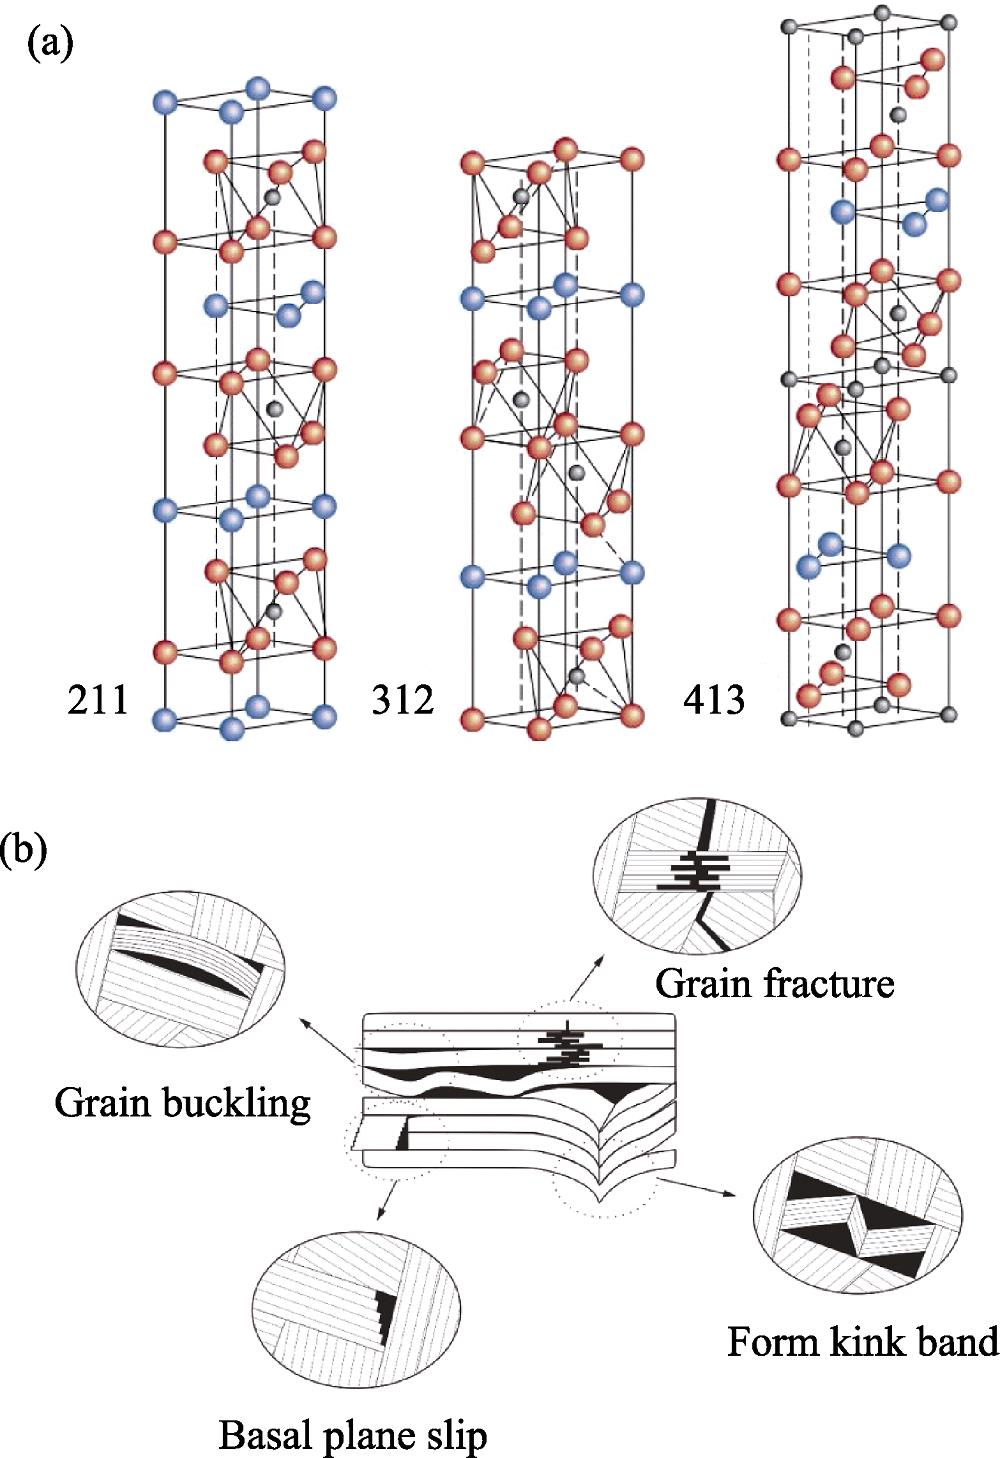 Crystal structure (a) and micro-deformation mechanisms (b) of MAX phases[12,17]